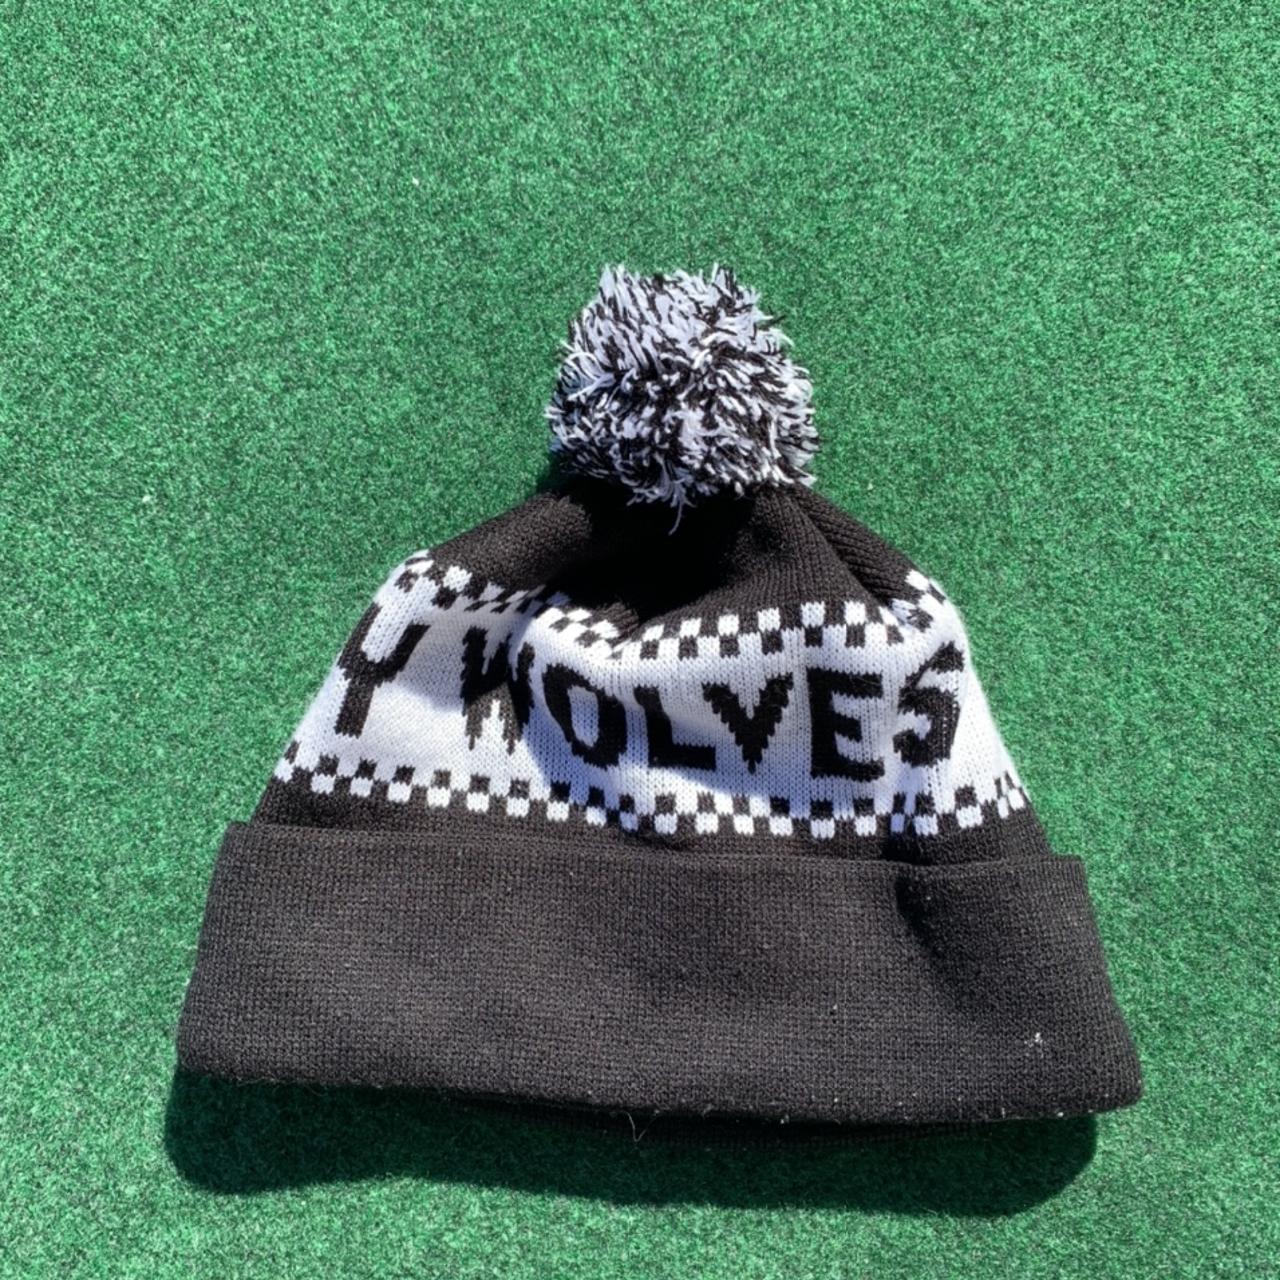 Product Image 1 - Raised By wolves beanie 
#beanies
#retro
#asaprocky
#coldweather